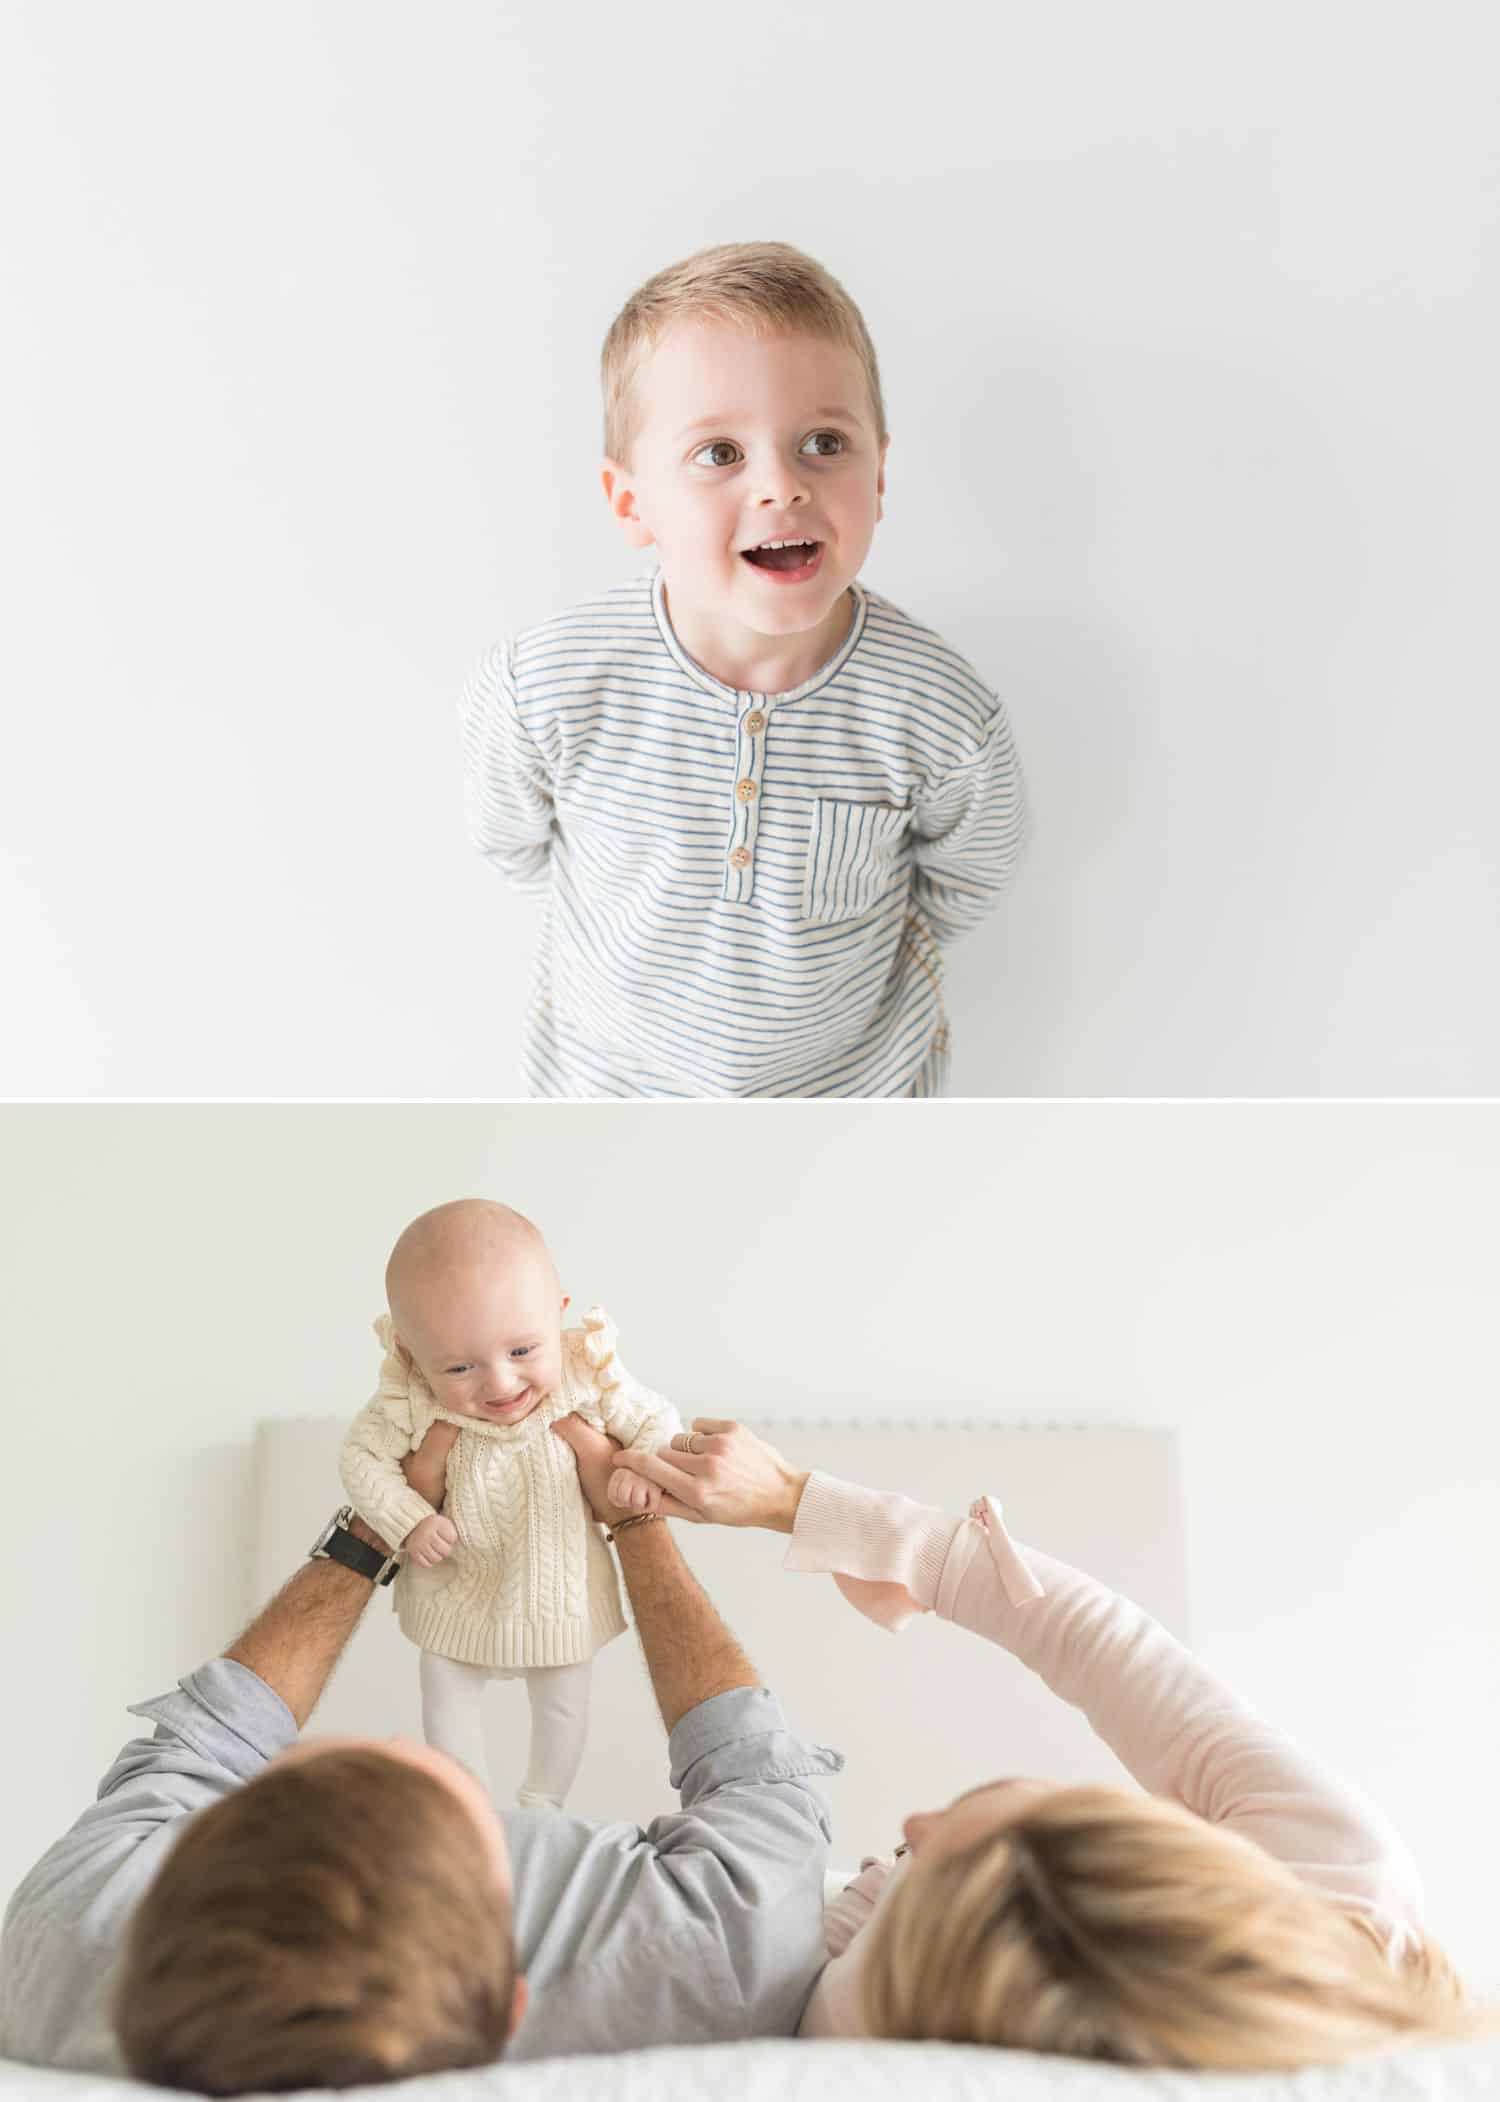 How To Get More Photography Clients? Start Saying No! - Clean and bright family photographs by Jenny Perry.